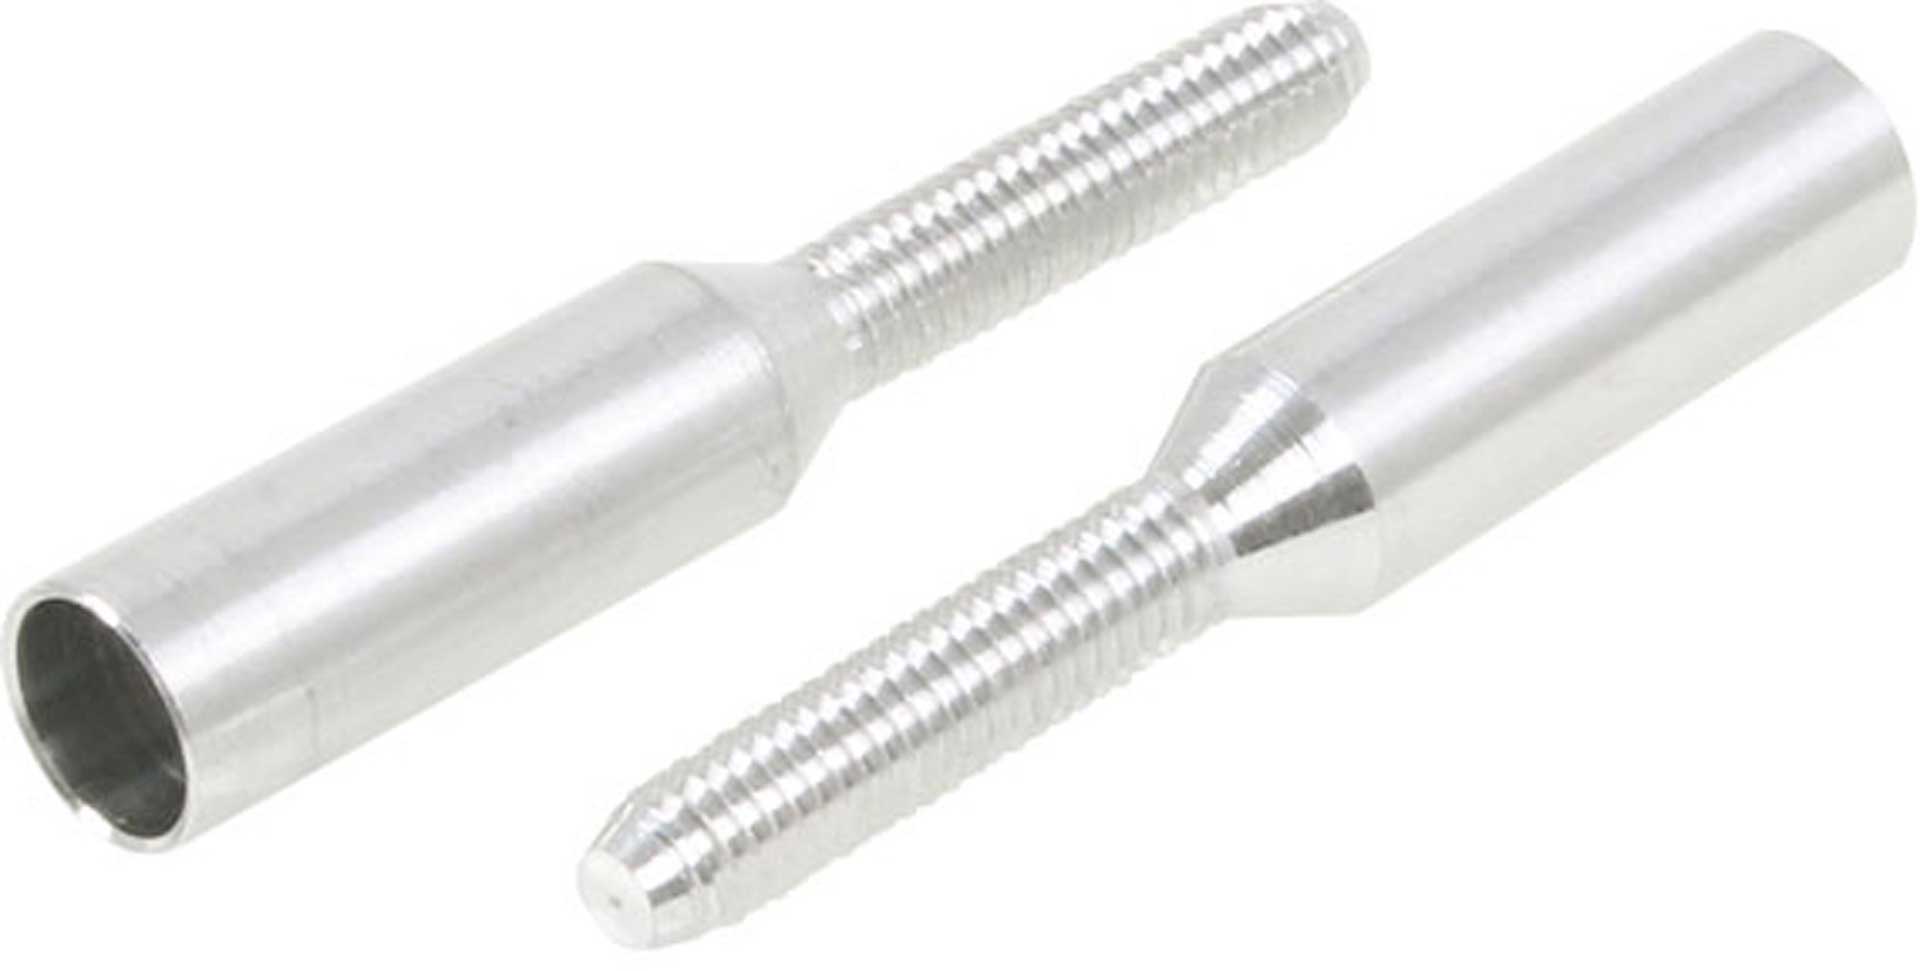 MP-JET PUSH ROD CONNECTOR 5MM M4 2 PCS. FOR 5MM CARBON TUBING